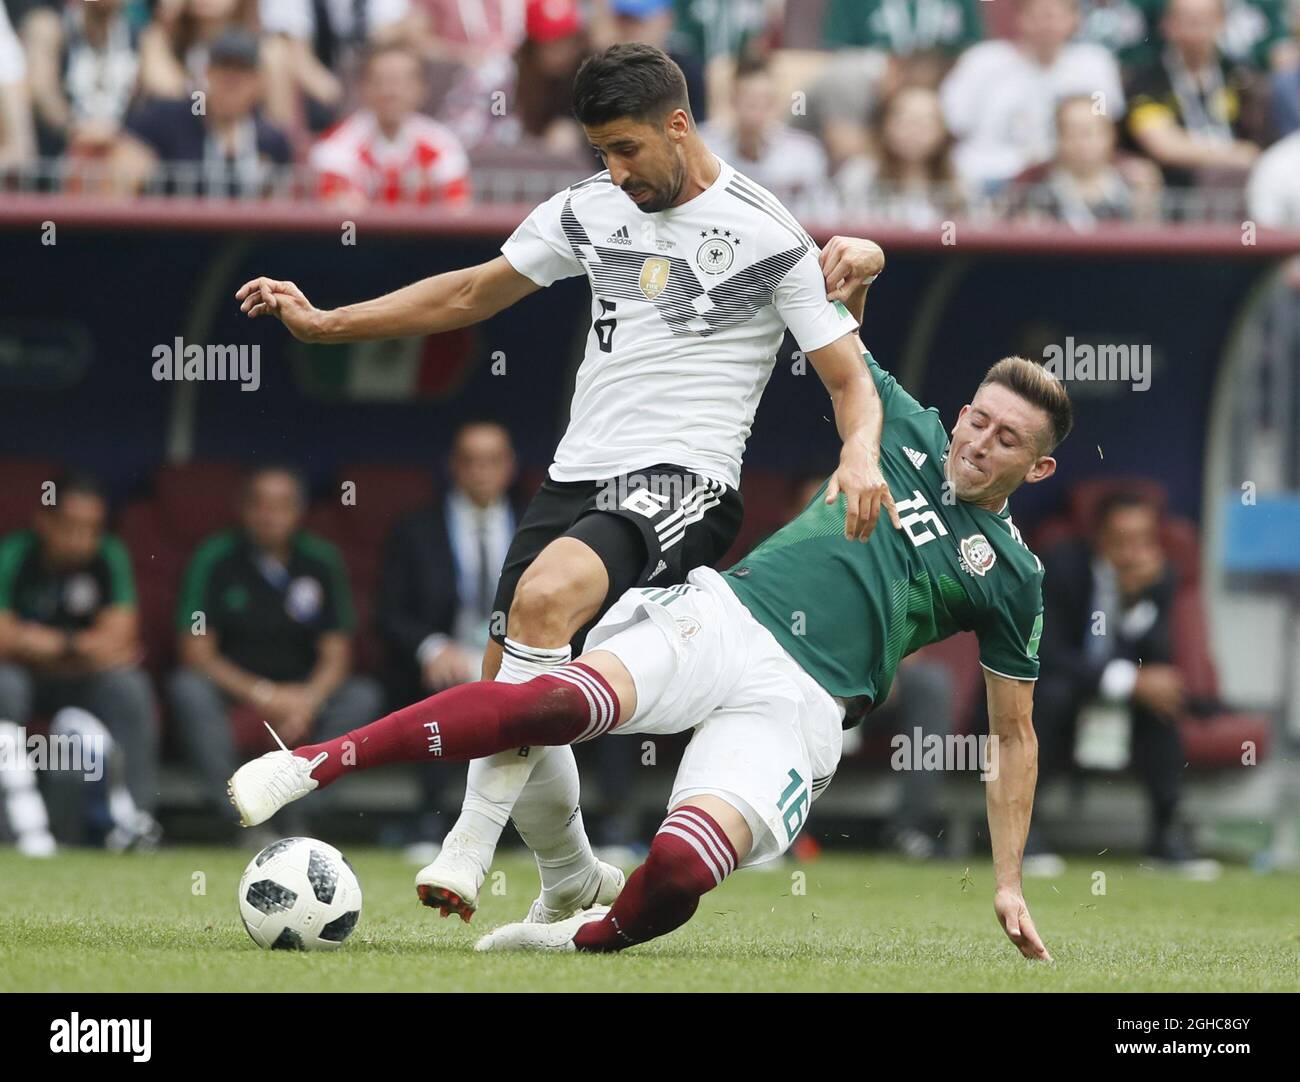 Sami Khedira of Germany tackled by Hector Herrera of Mexico during the FIFA World Cup 2018 Group F match at the Luzhniki Stadium, Moscow. Picture date 17th June 2018. Picture credit should read: David Klein/Sportimage via PA Images Stock Photo